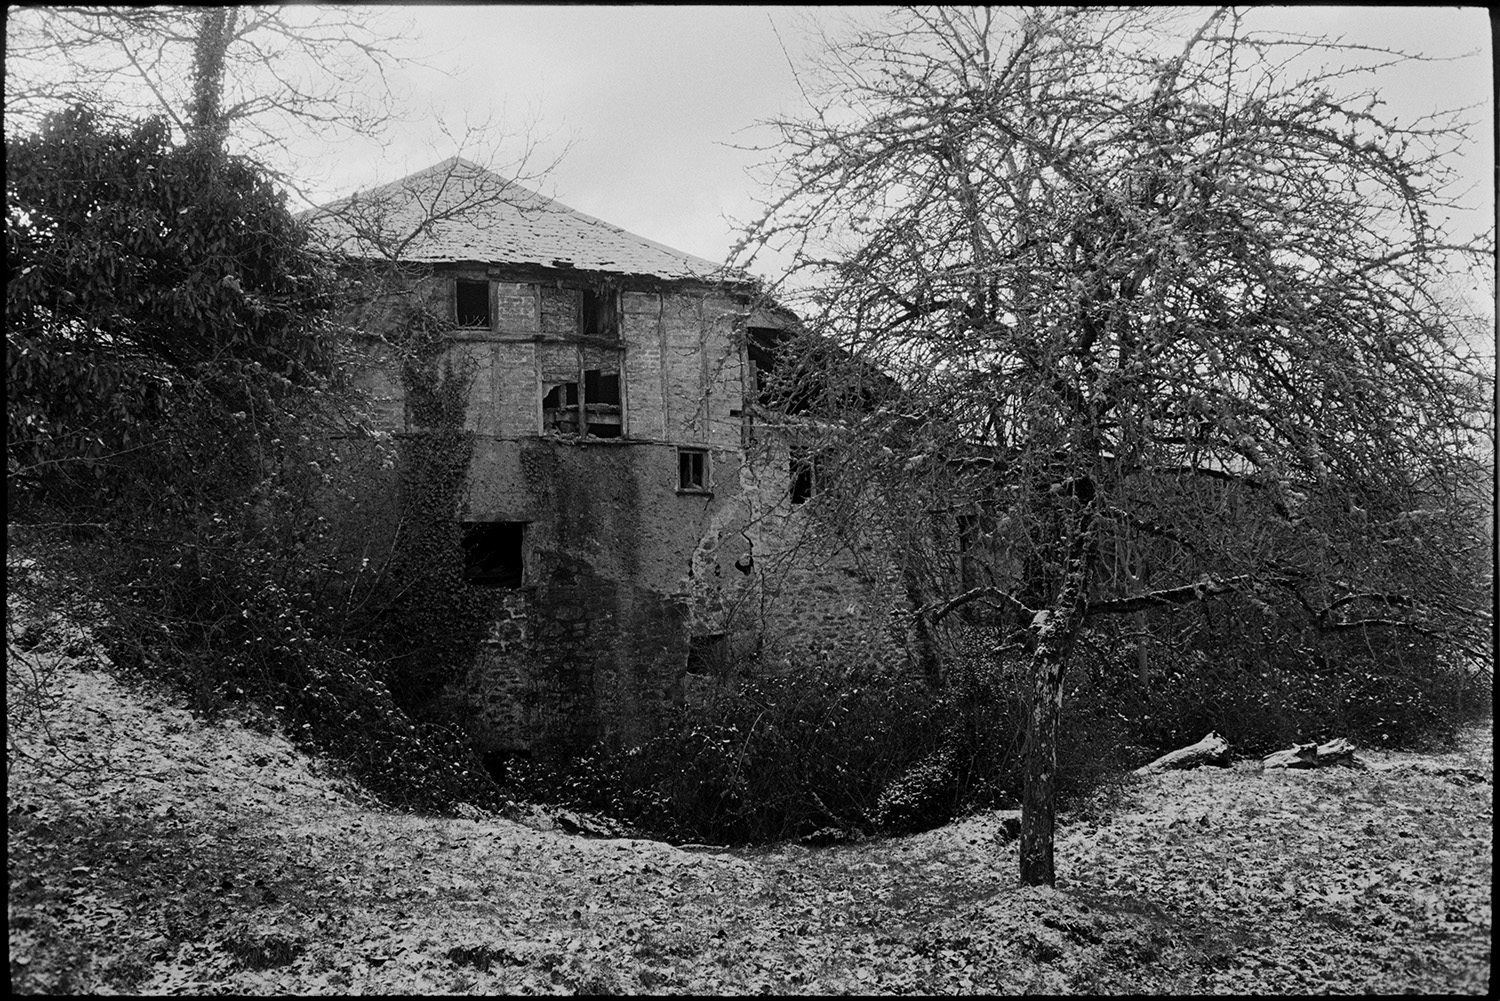 Snow. Farmer inspecting sheep in pen, clipping feet and drenching, syringe and ointment.
[A derelict mill building at Westpark, Iddesleigh, standing in a field lightly covered in snow, with an apple tree and overgrown hedges. The building wall has a timber frame which is infilled with brick and cob.]